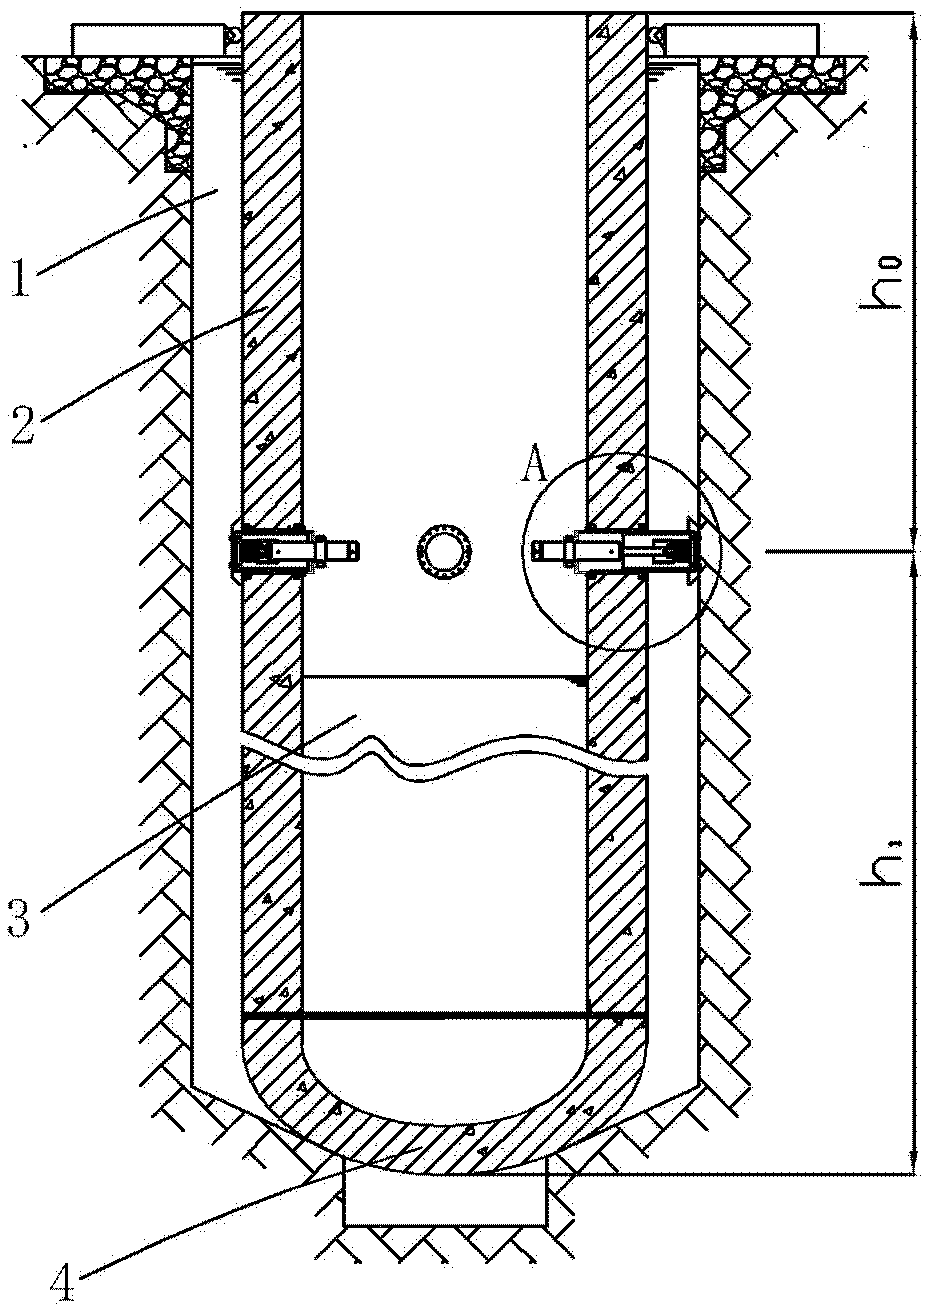 Intermediate support device for ultra-deep drilling borehole